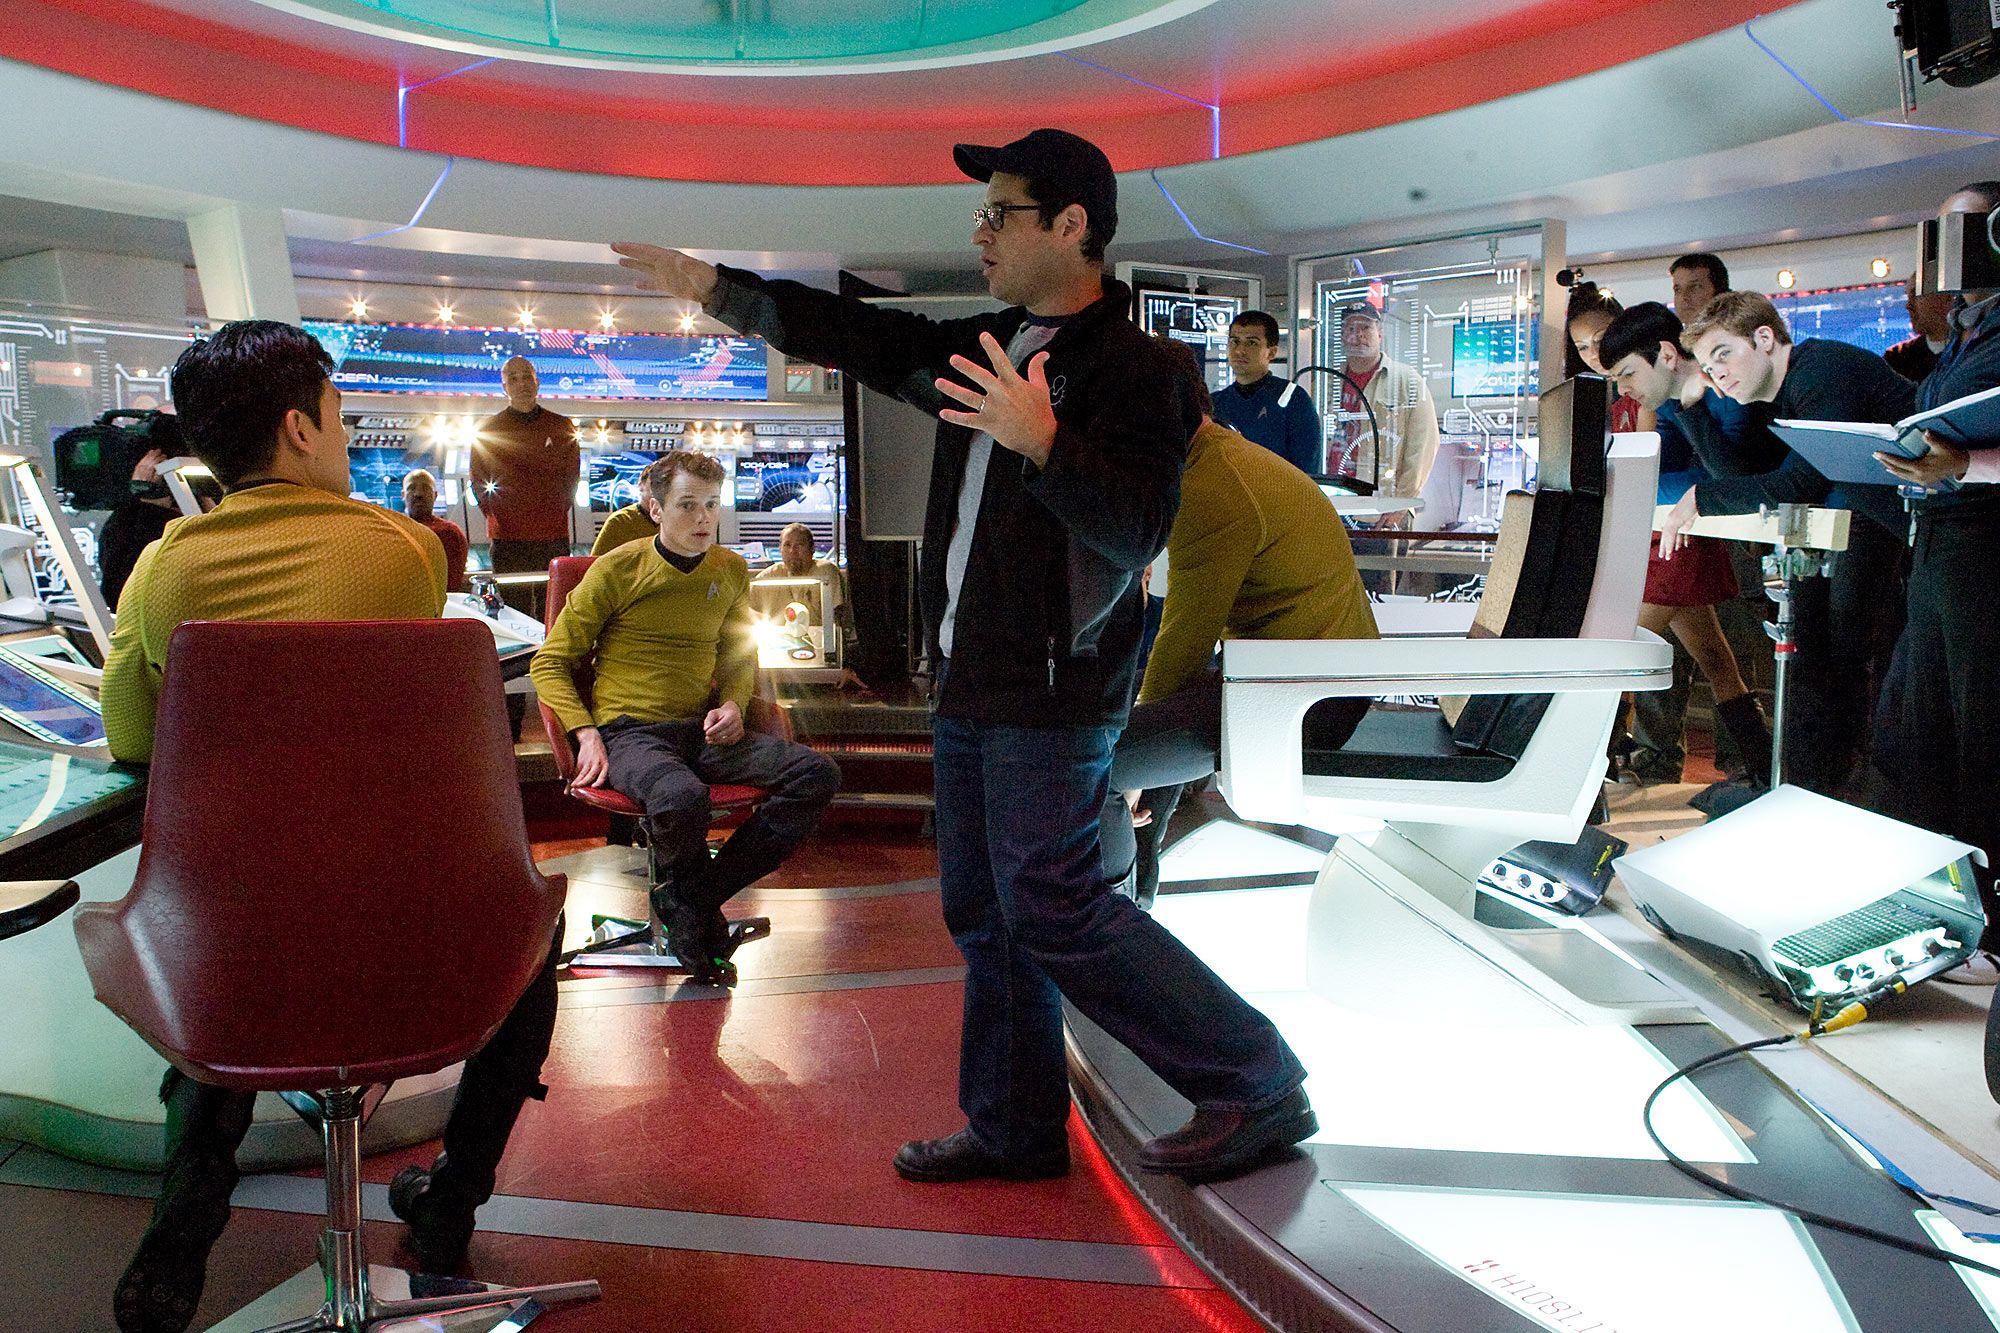 Director J.J. Abrams (center) discusses a scene with actors John Cho (left, as Sulu), Anton Yelchin (center left, as Chekov), Zachary Quinto (center right, as Spock), and Chris Pine (far right, as James T. Kirk) behind-the-scenesIt's a funny thing when we were working on the script, frankly it was one of those moments where I was like, how in the name of God are we going to figure it out. One of the genius moves that Alex (Kurtzman) and Bob (Orci) did is that they just did it, Abrams explained. 